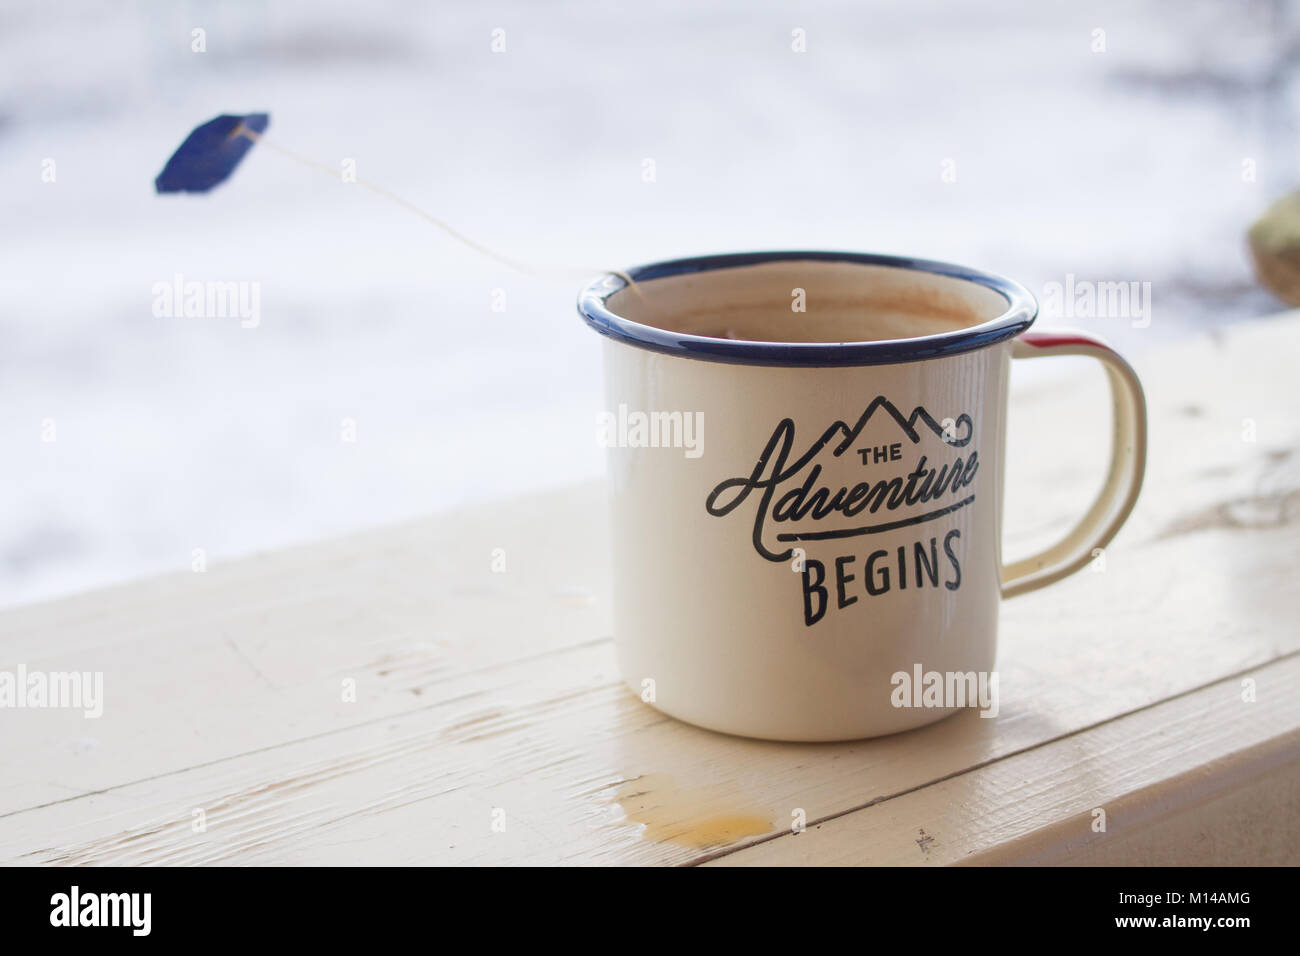 Enamel mug with strong tea and tea bag on a wooden fence on a snowy winter background. Stock Photo